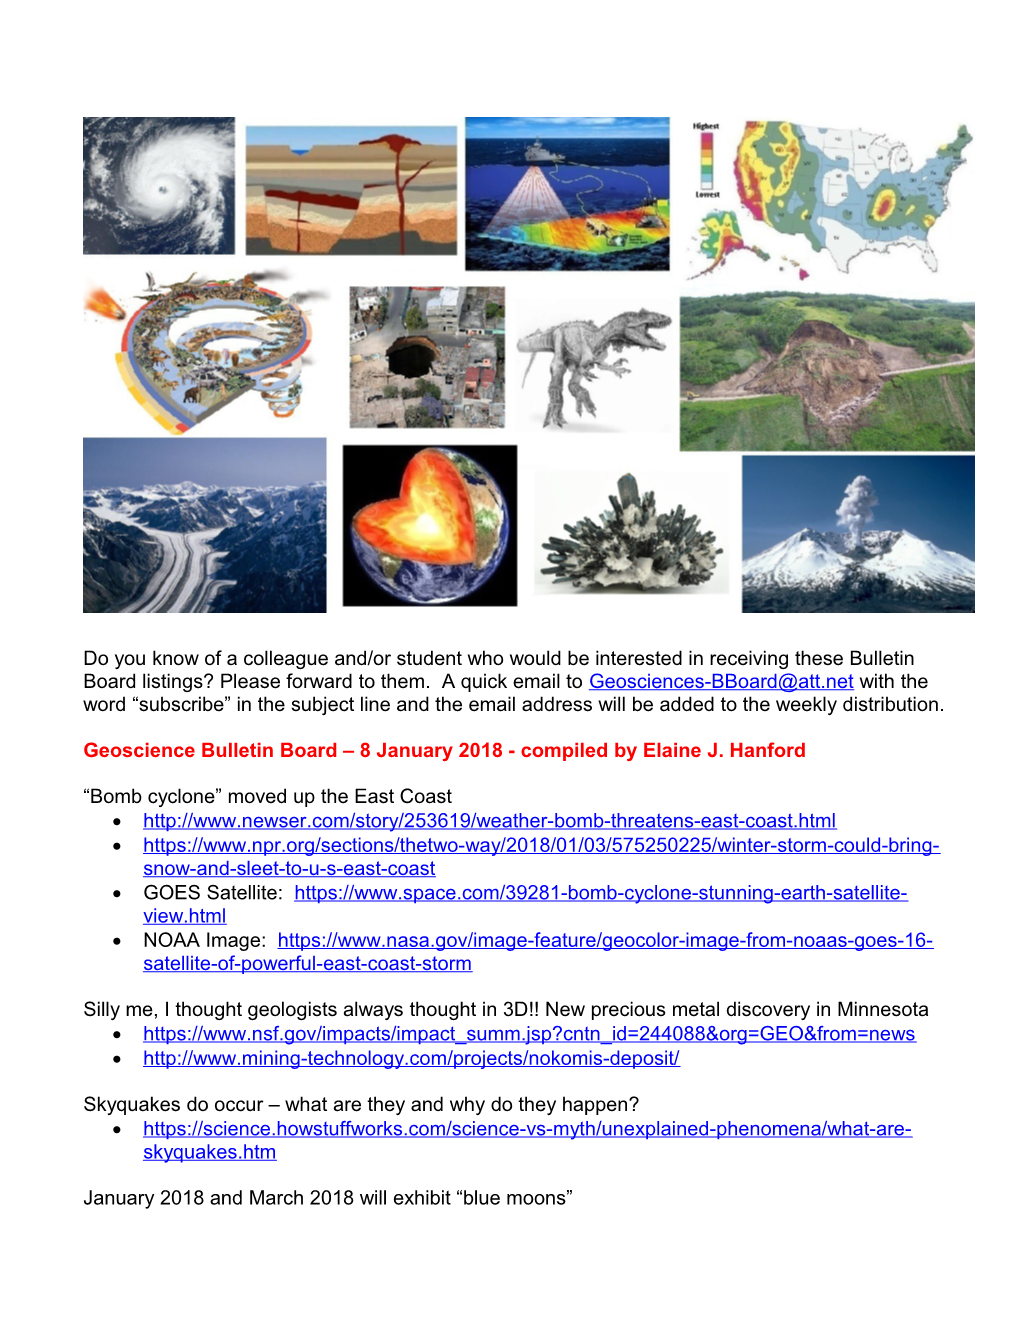 Geoscience Bulletin Board 8 January 2018- Compiled by Elaine J. Hanford